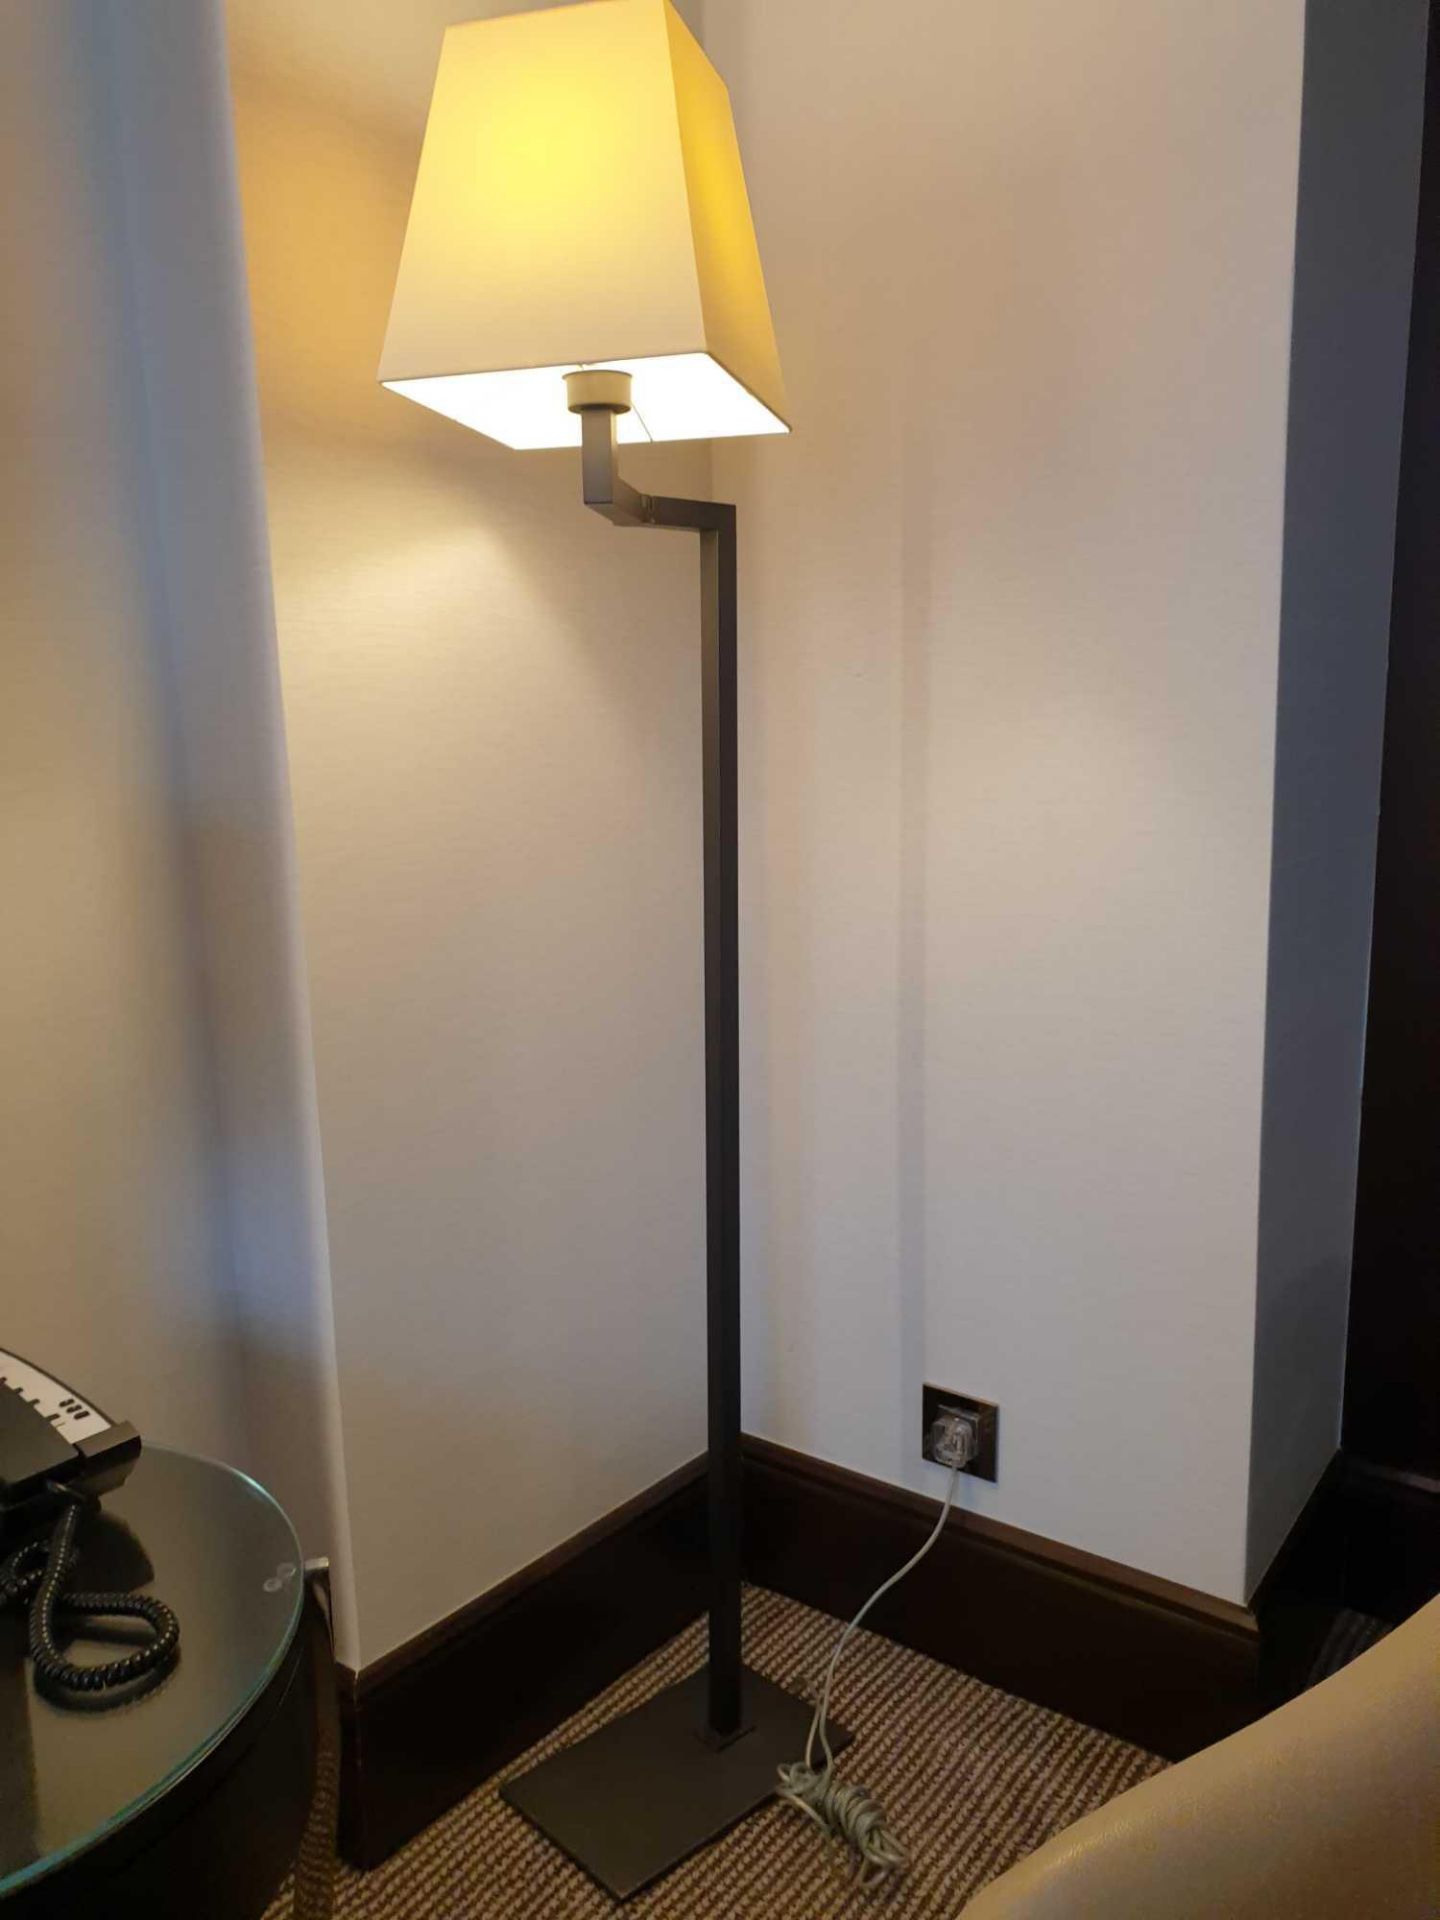 Sifra Floor Lamp Model LMS 600 ENG Grey Metal Base With Single Arm Single Bulb Complete With Cream - Image 2 of 3